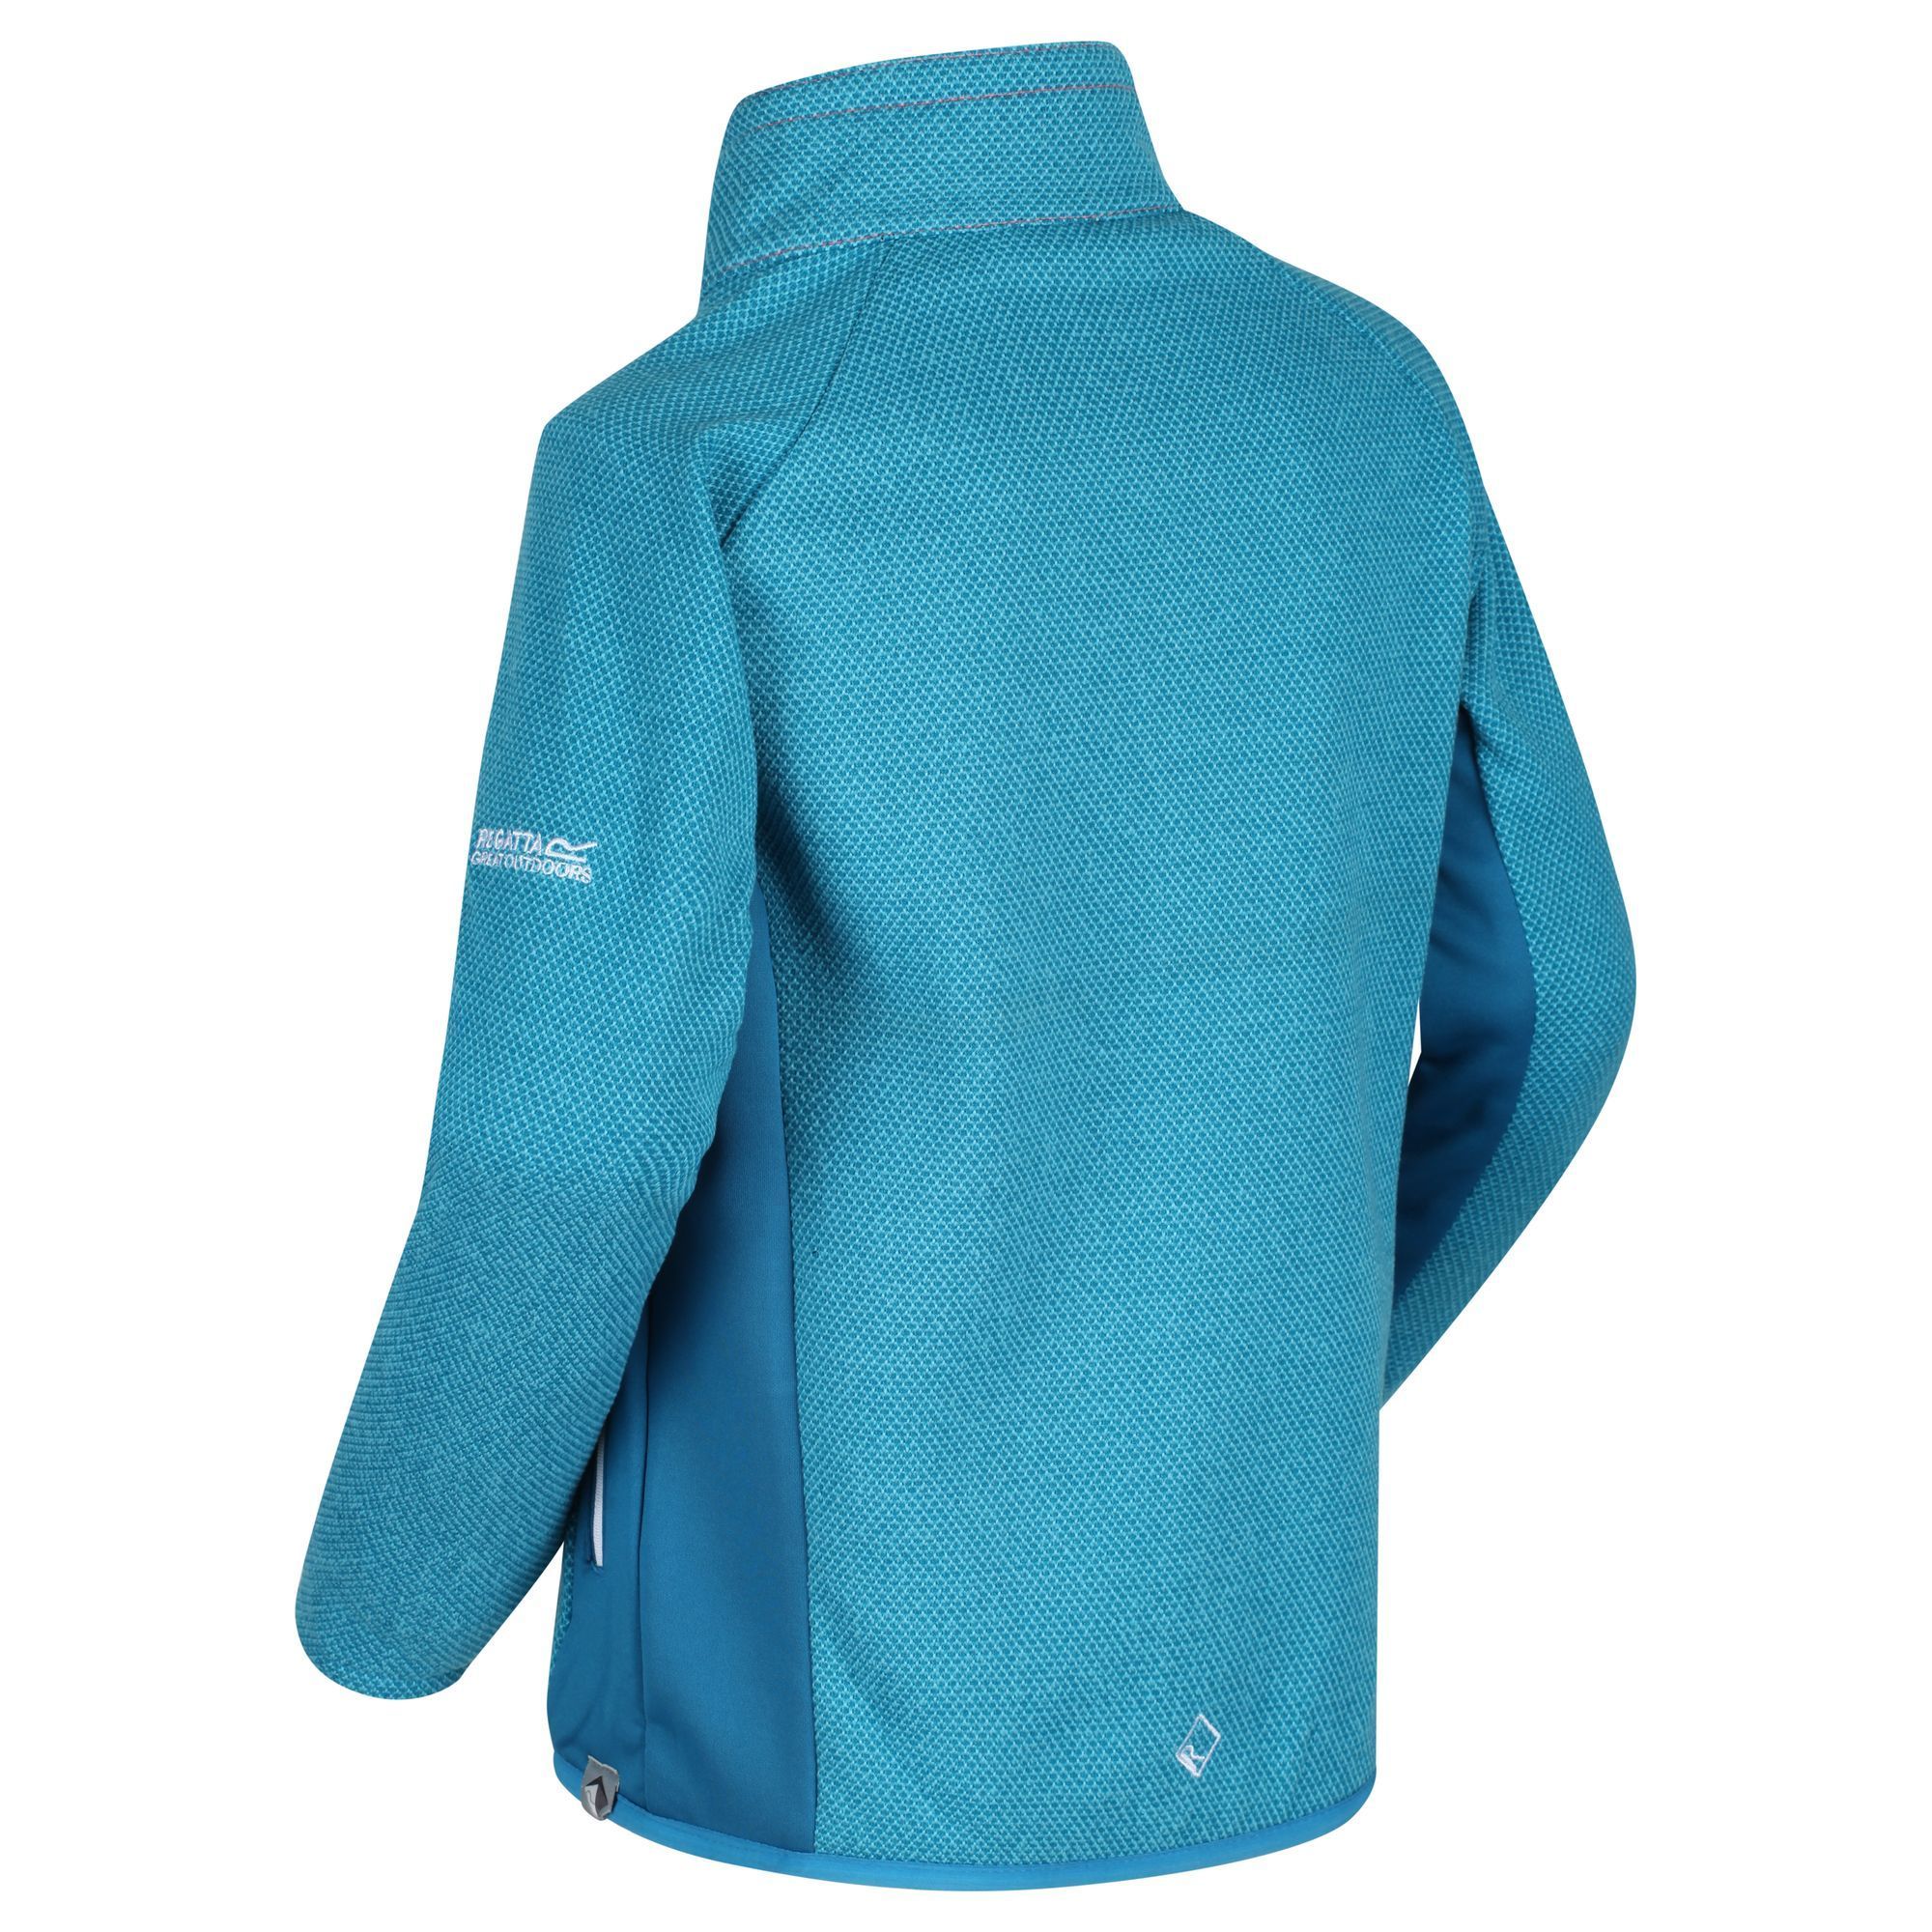 Material: 100% Polyester. Warm, stretchy, durable and water-resistant 235gsm two tone fleece jacket with Extol stretch side and underarm panels. Stretch binding to collar, cuffs and hem. 2 zipped lower pockets. Regatta `R` logo on the chest.